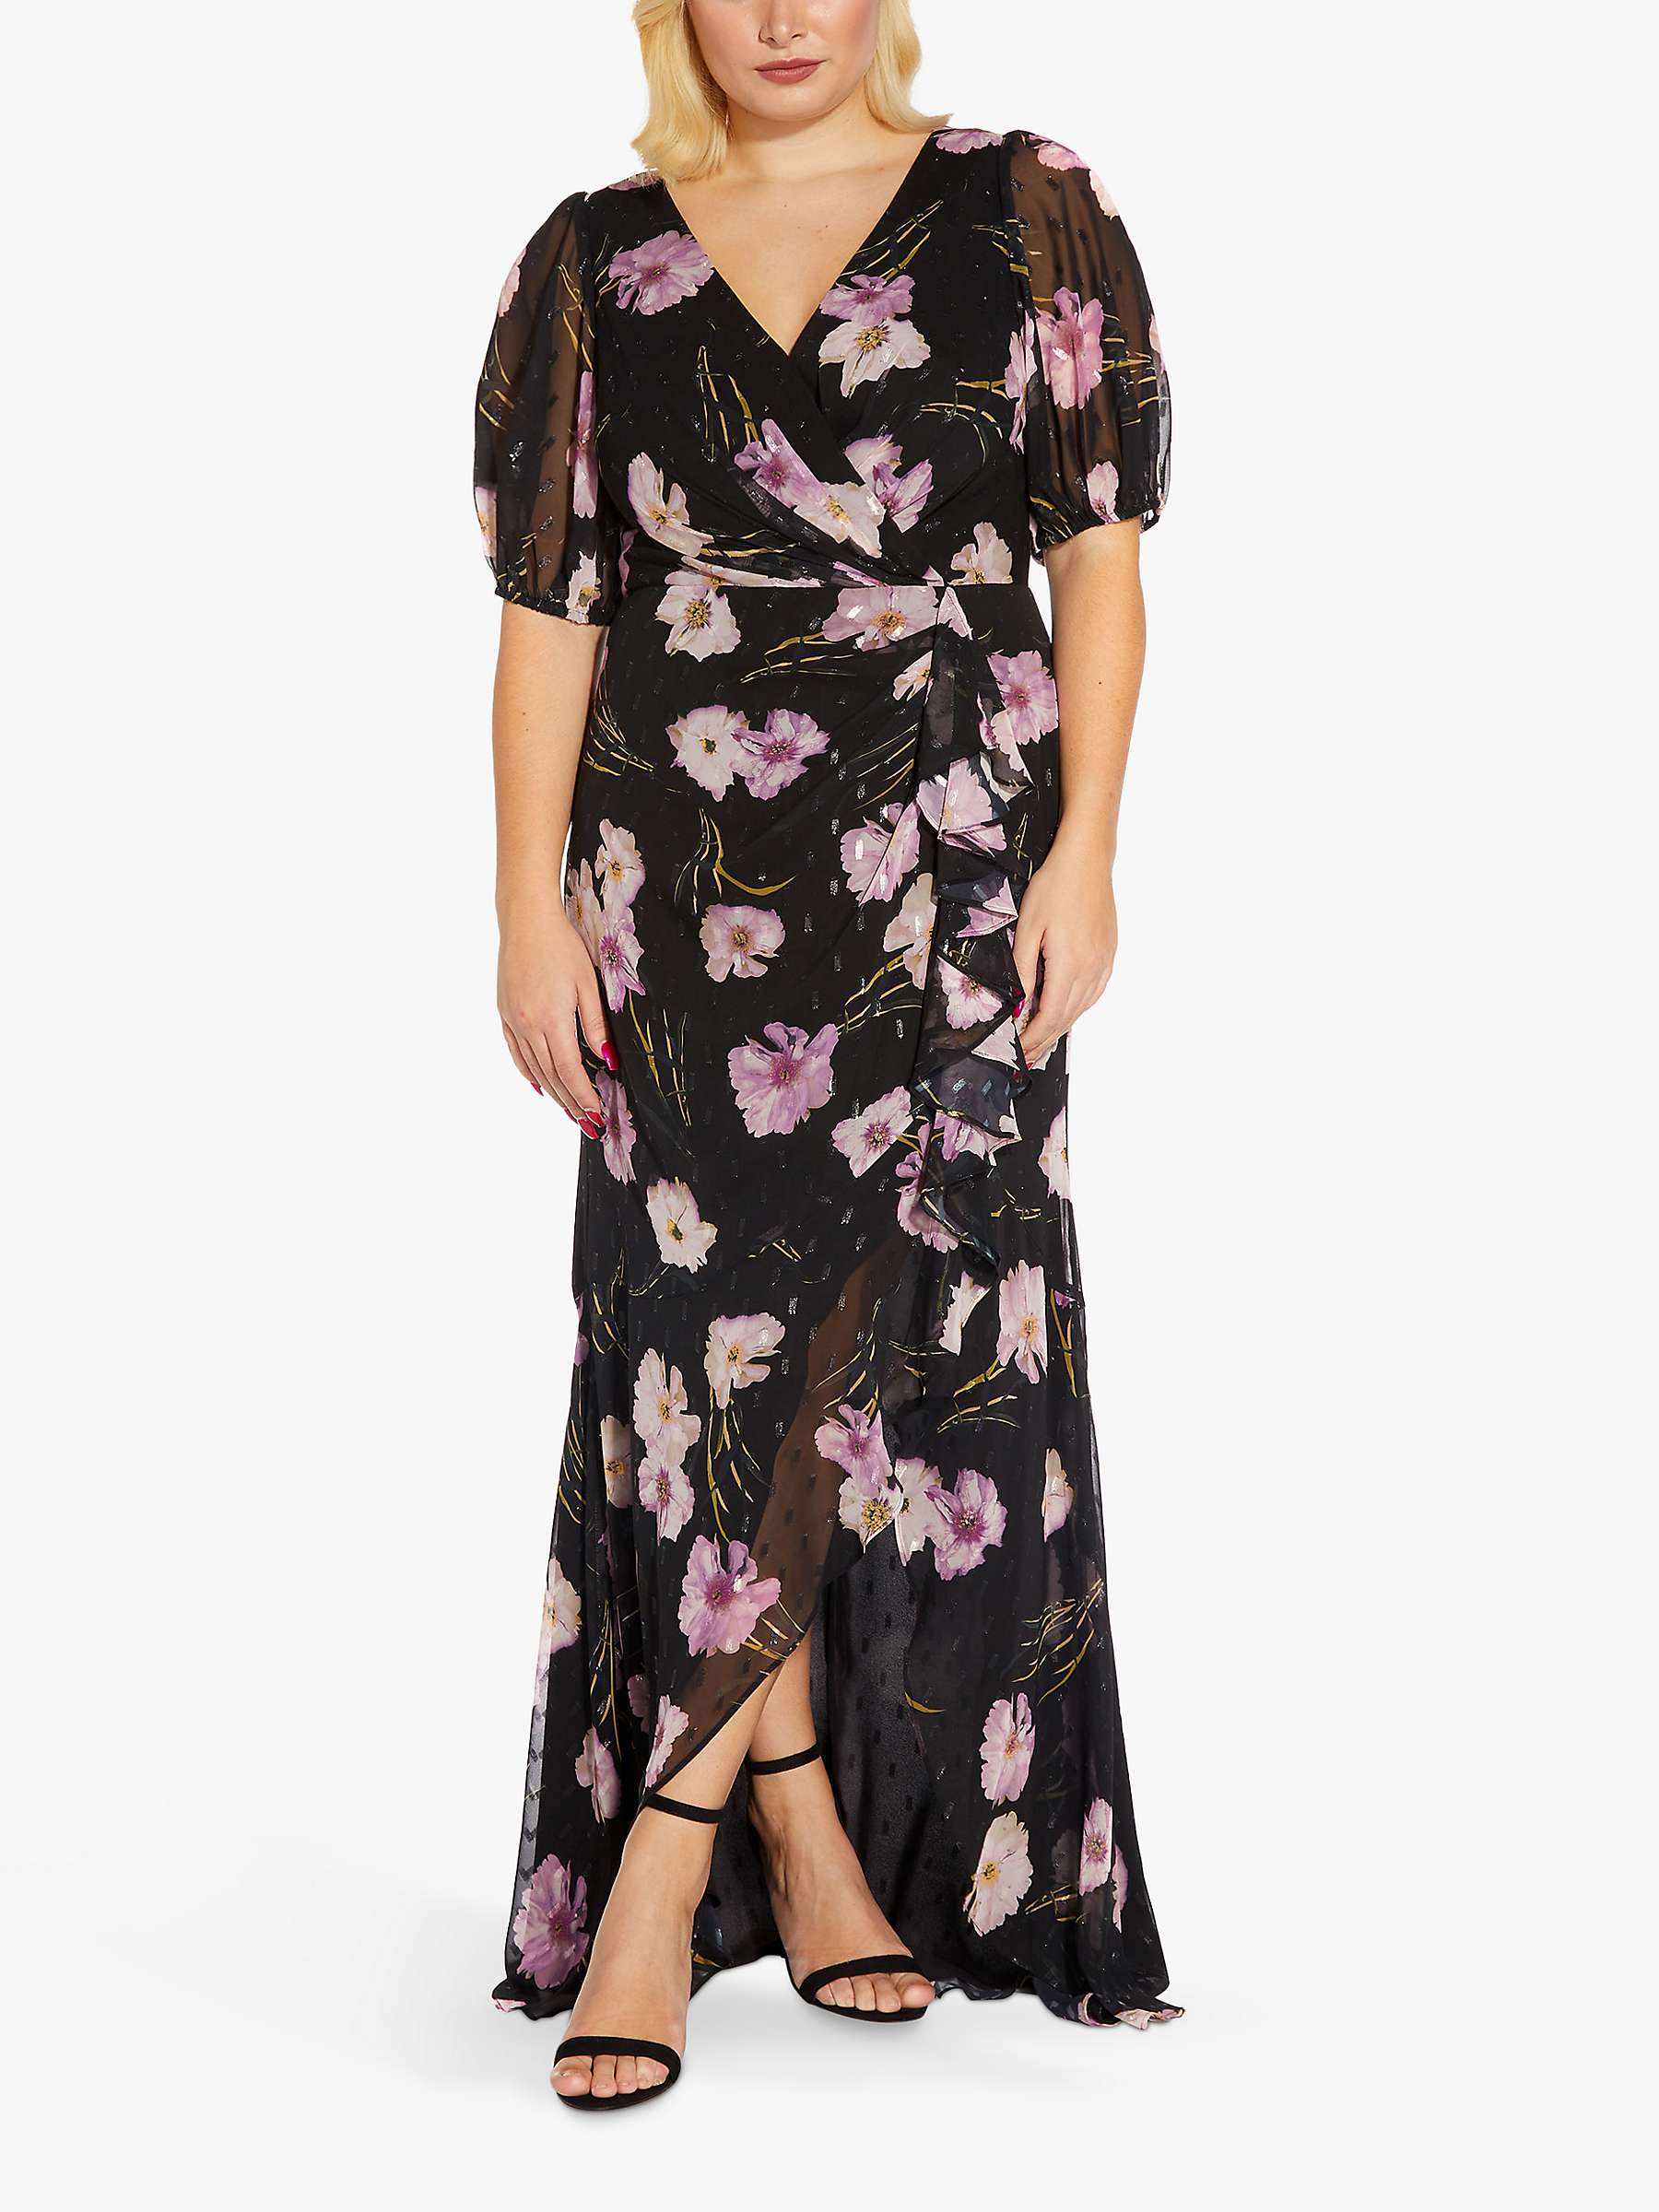 Intacto Tormenta Inyección Adrianna Papell Plus Size Floral Chiffon Wrap Maxi Dress, Black/Multi at  John Lewis & Partners